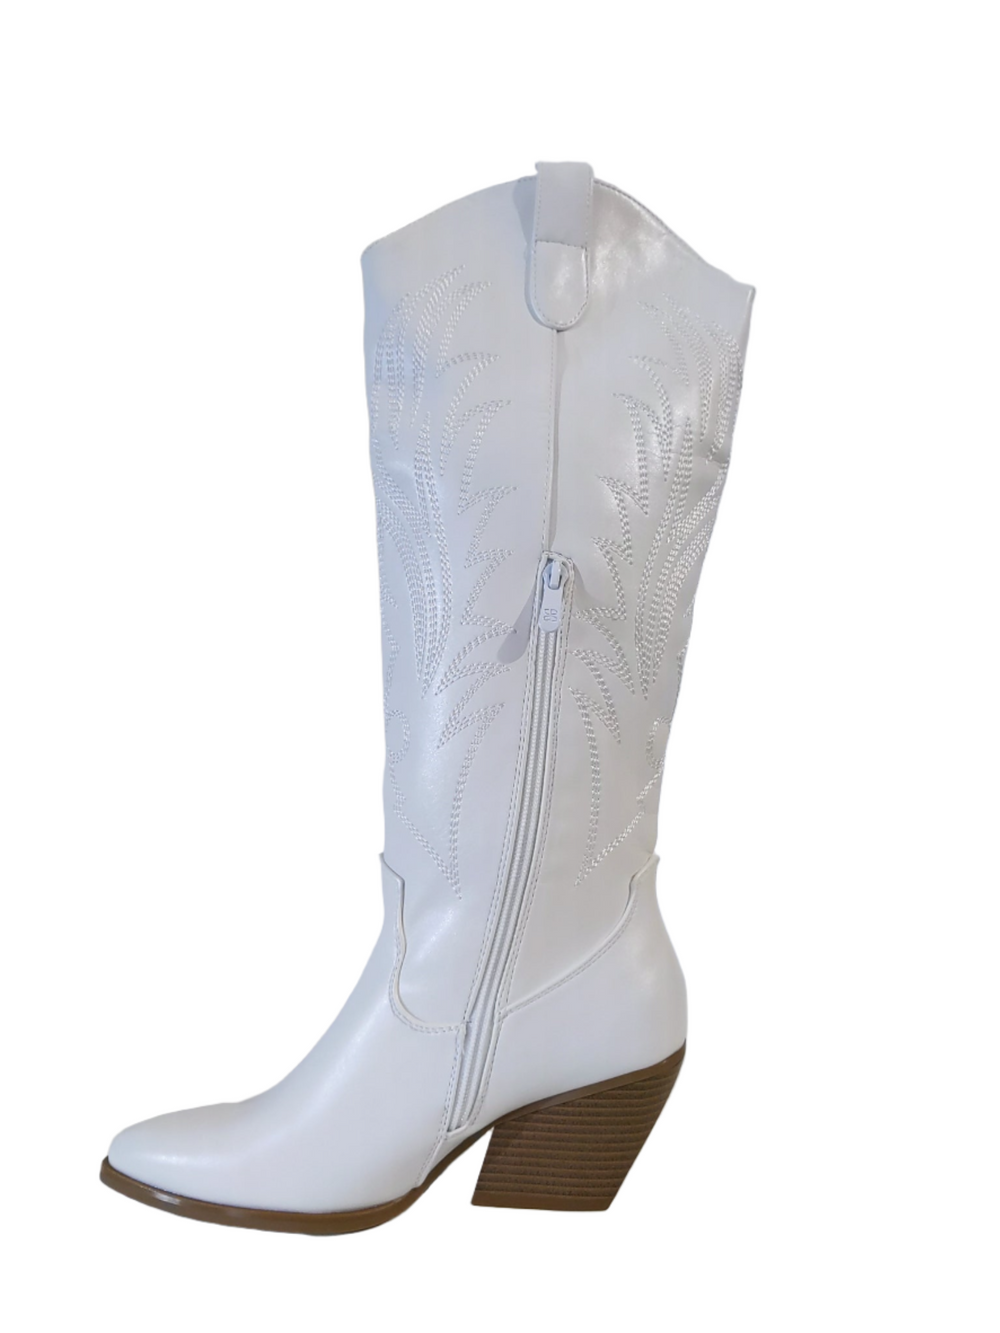 White Knee High Western Style Cowboy Boots